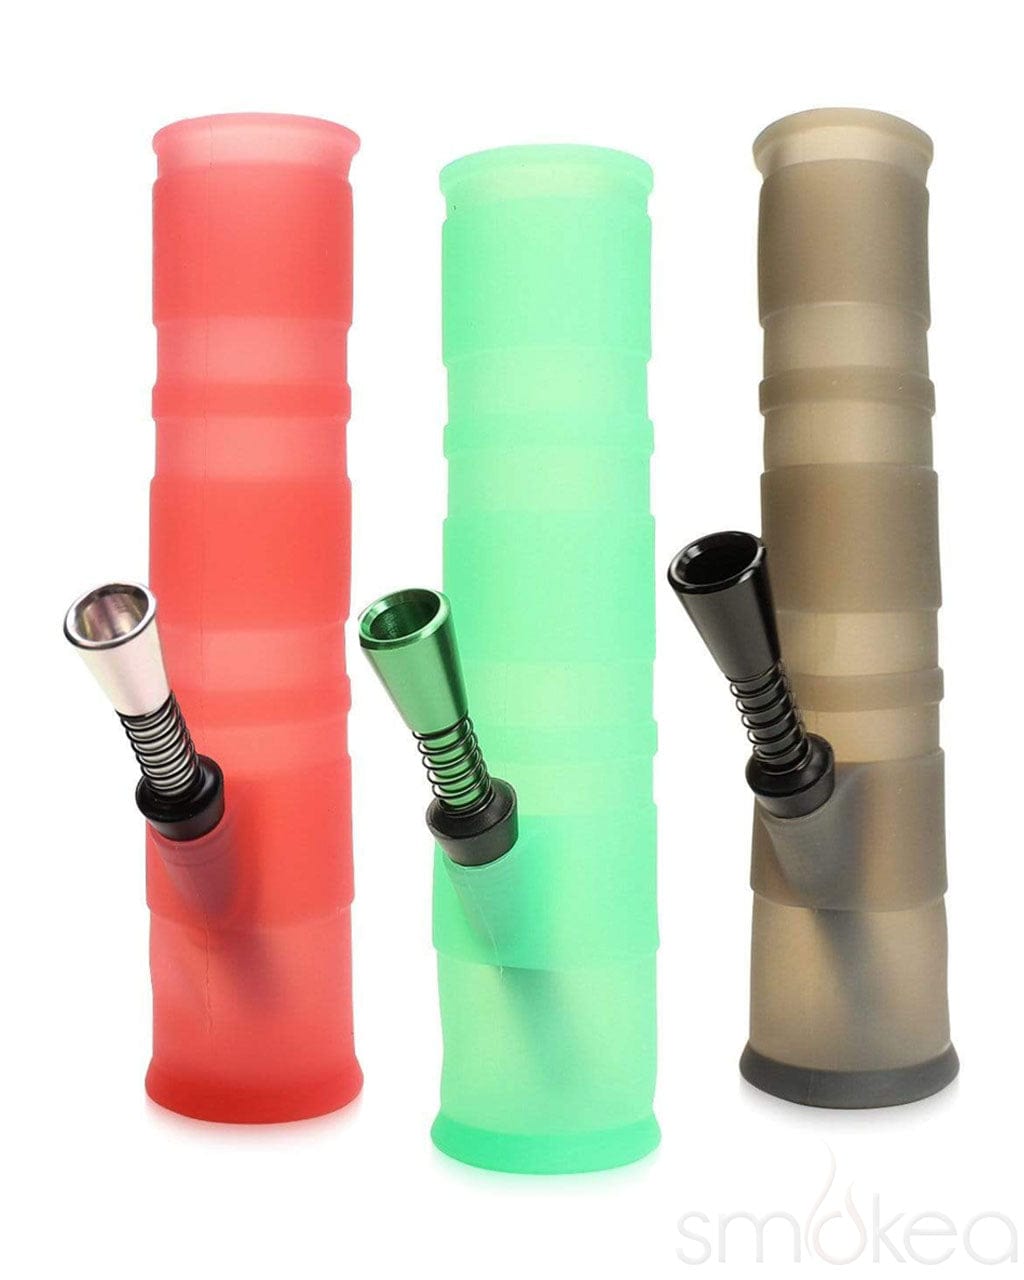 Bong Filters - Screens For Pipes & Joint Filter Tips